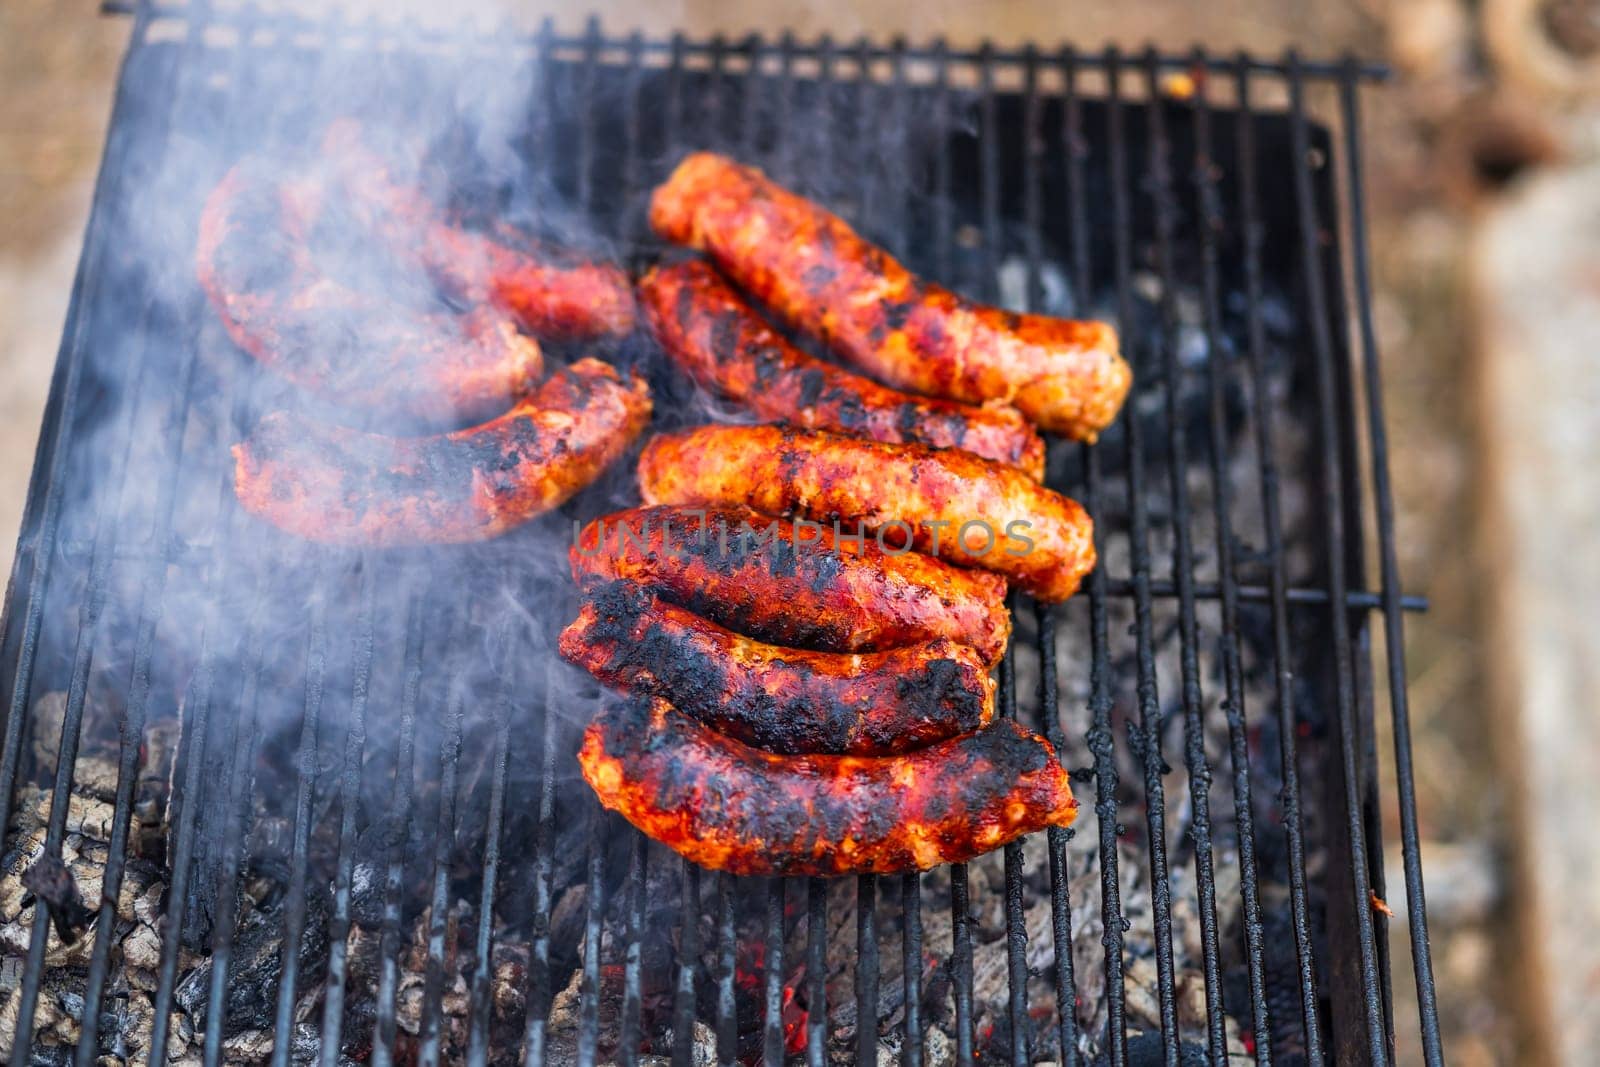 Grilling sausages on barbecue grill. Delicious sausages on charcoal grill by vladispas